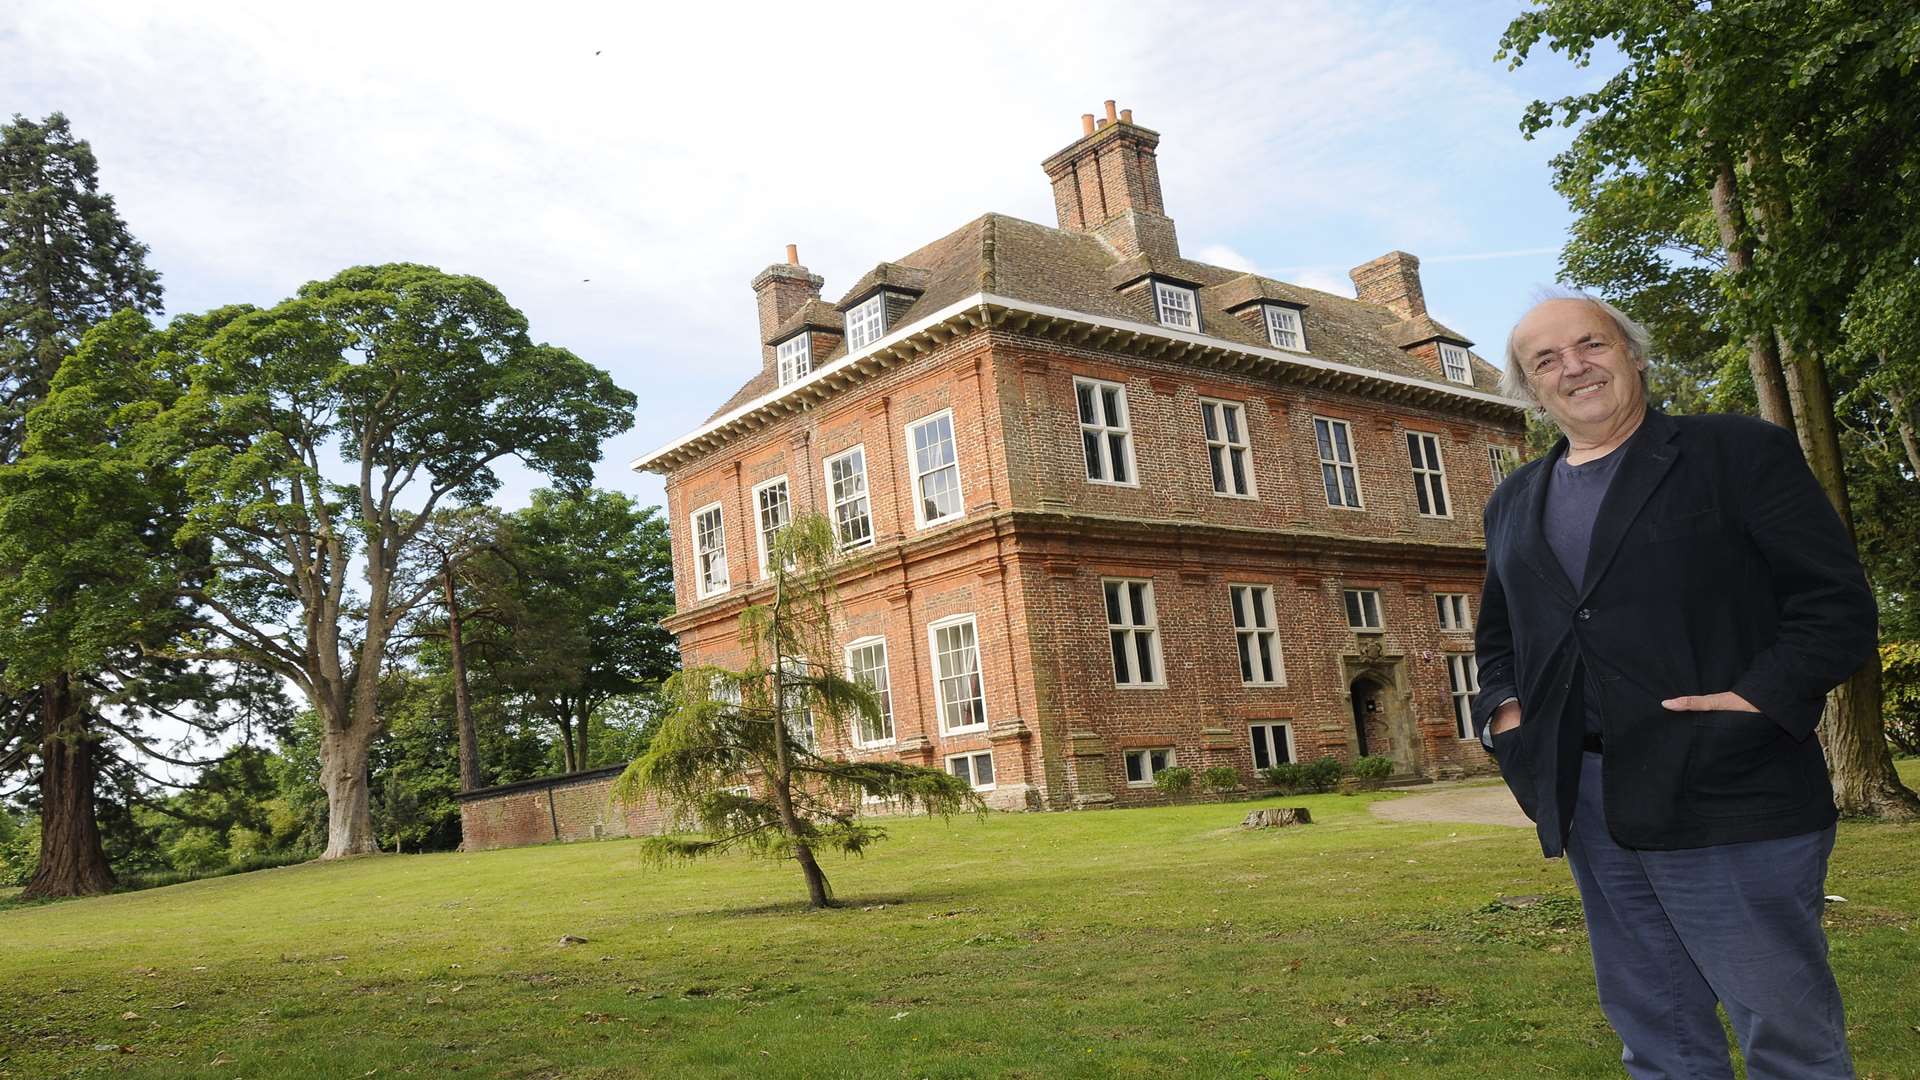 Peter Malkin has Bridge Place Manor on the market for £2,360,000